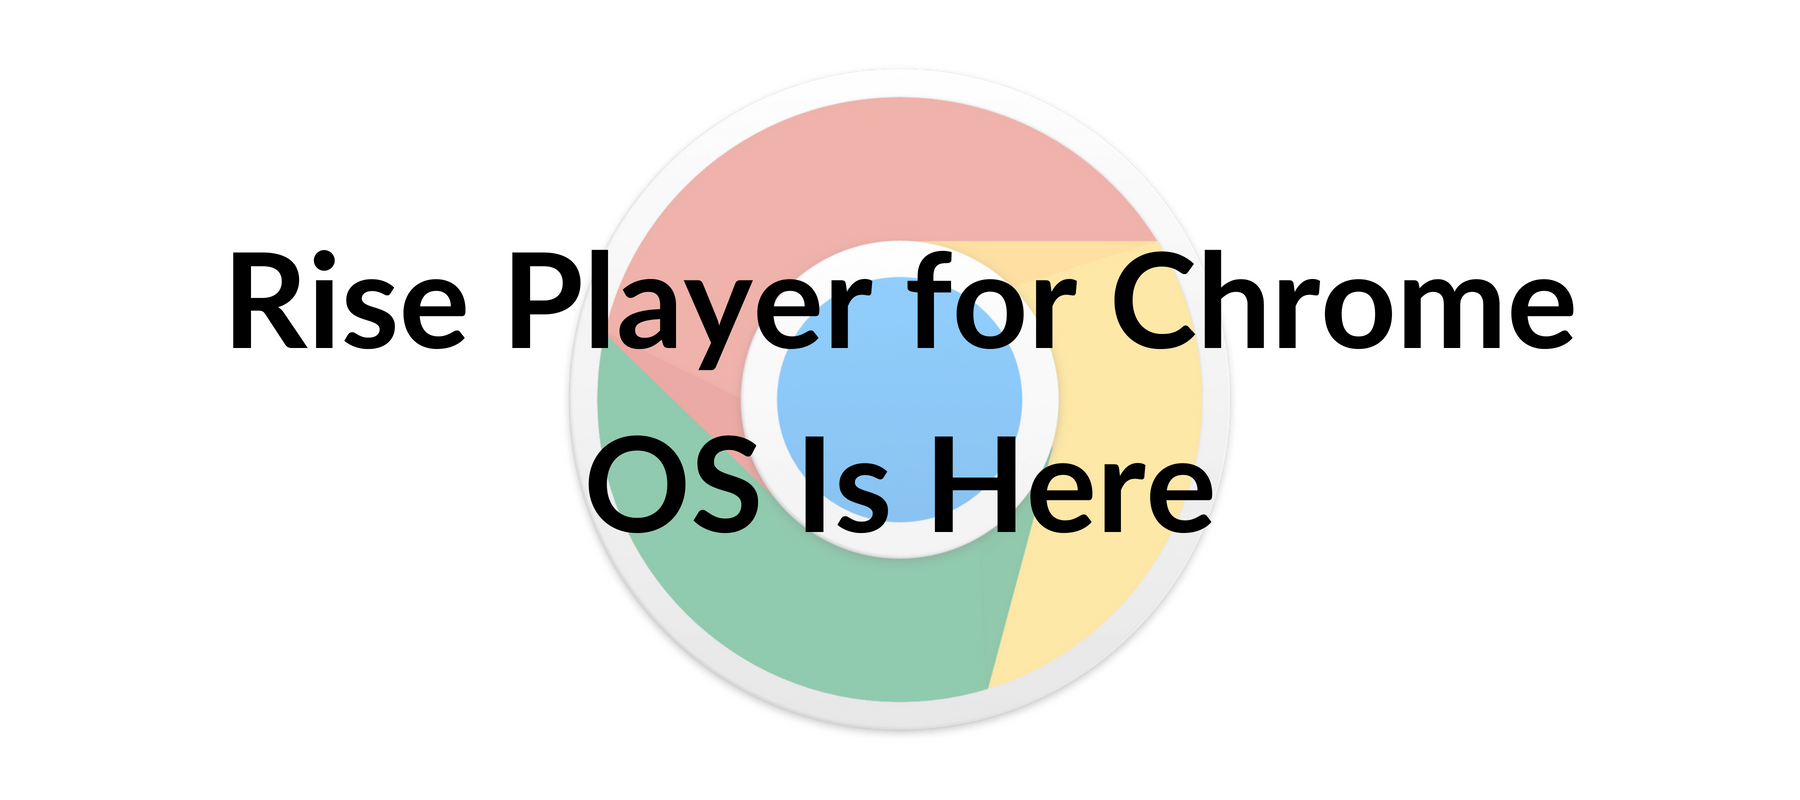 Rise Player for Chrome OS Is Here